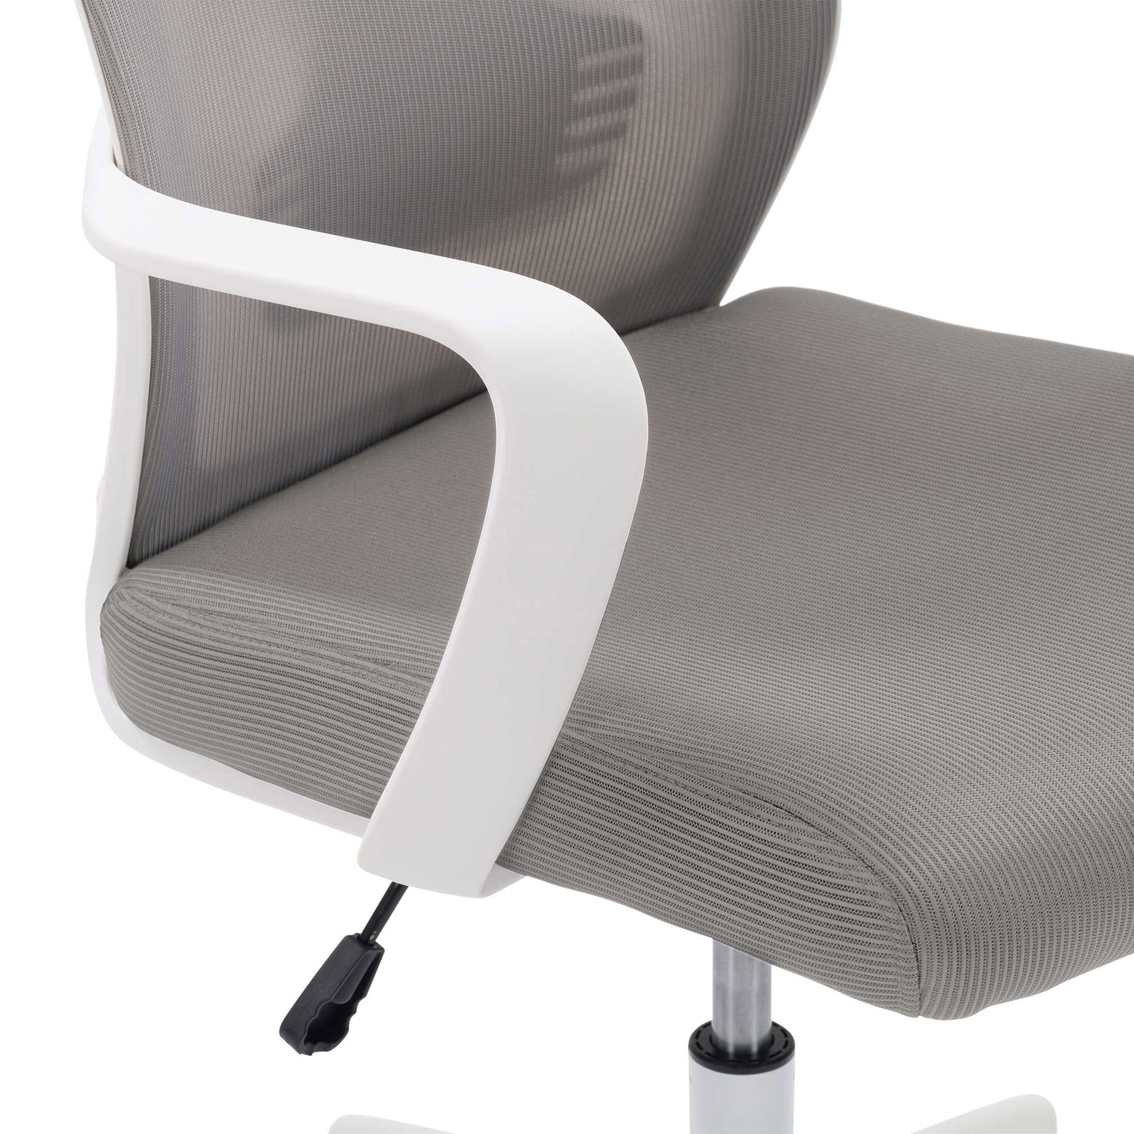 CorLiving Workspace Mesh Back Office Chair - Image 4 of 7